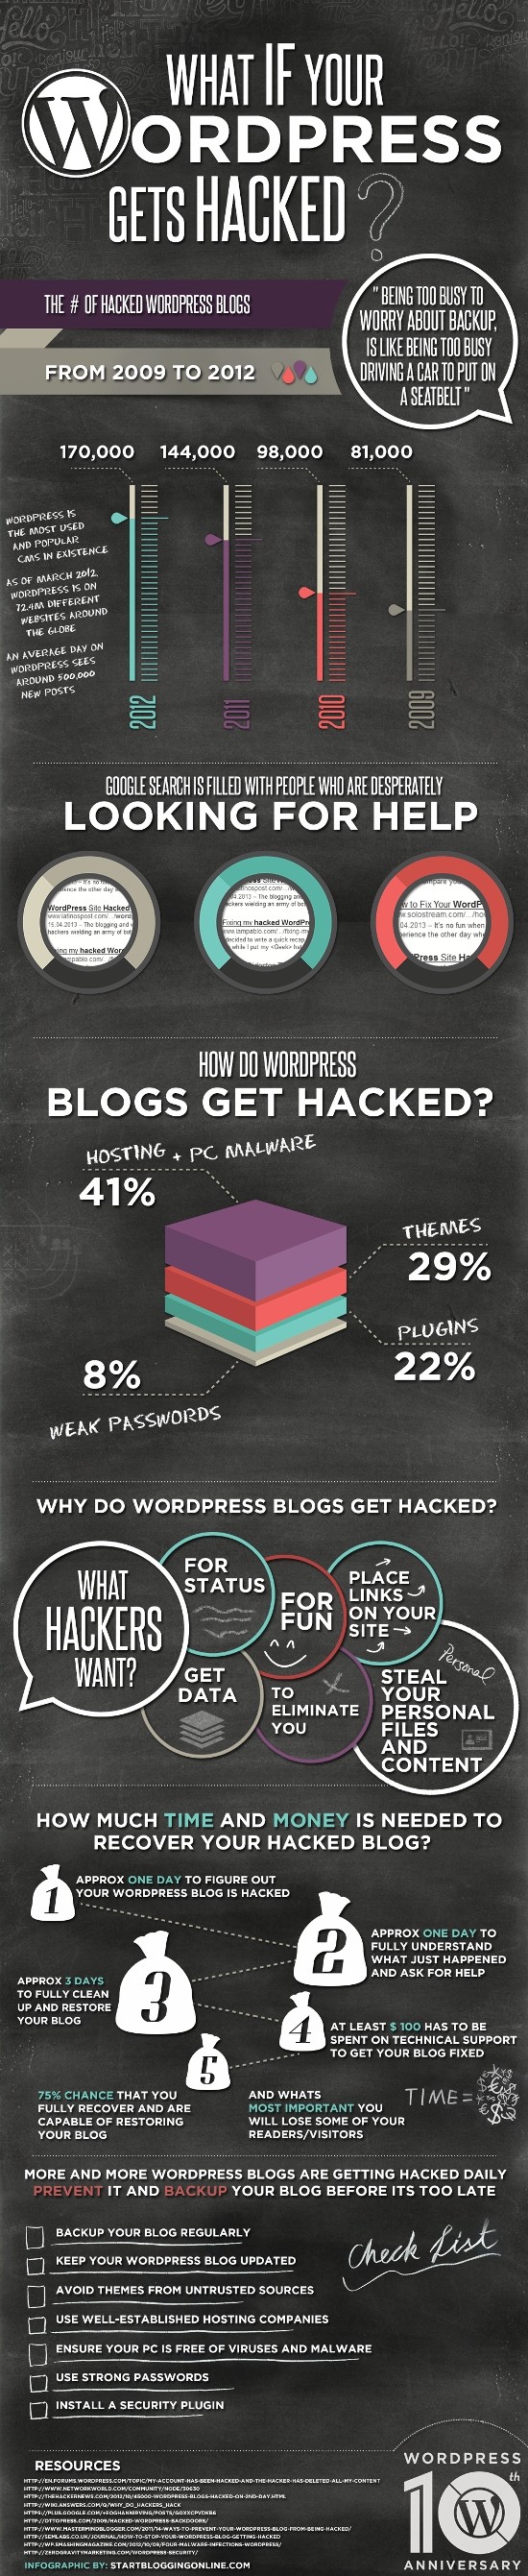 hacked wordpress what to do